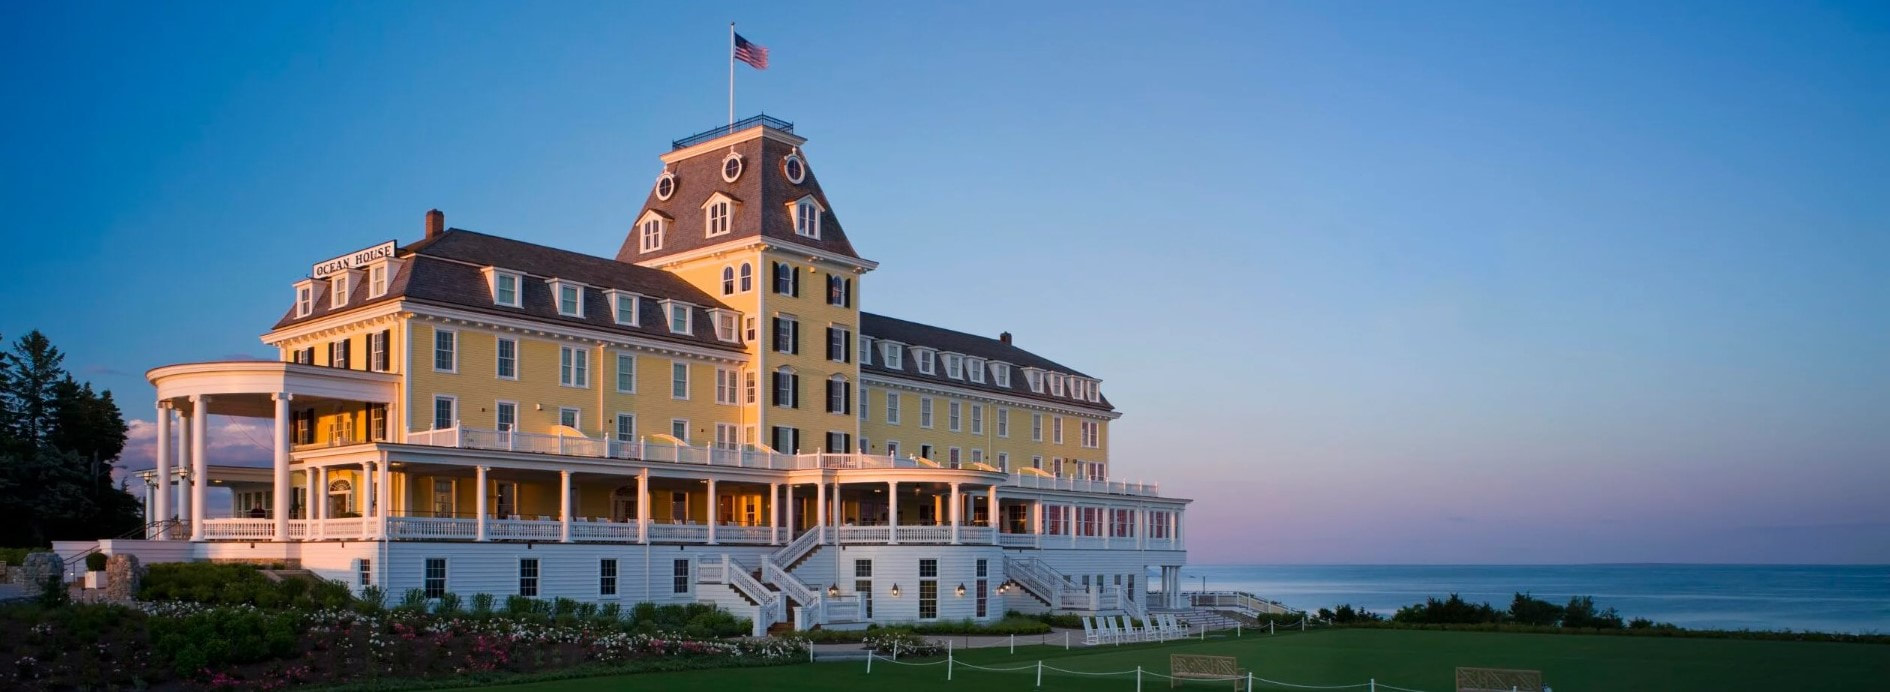 New England 5-star hotels